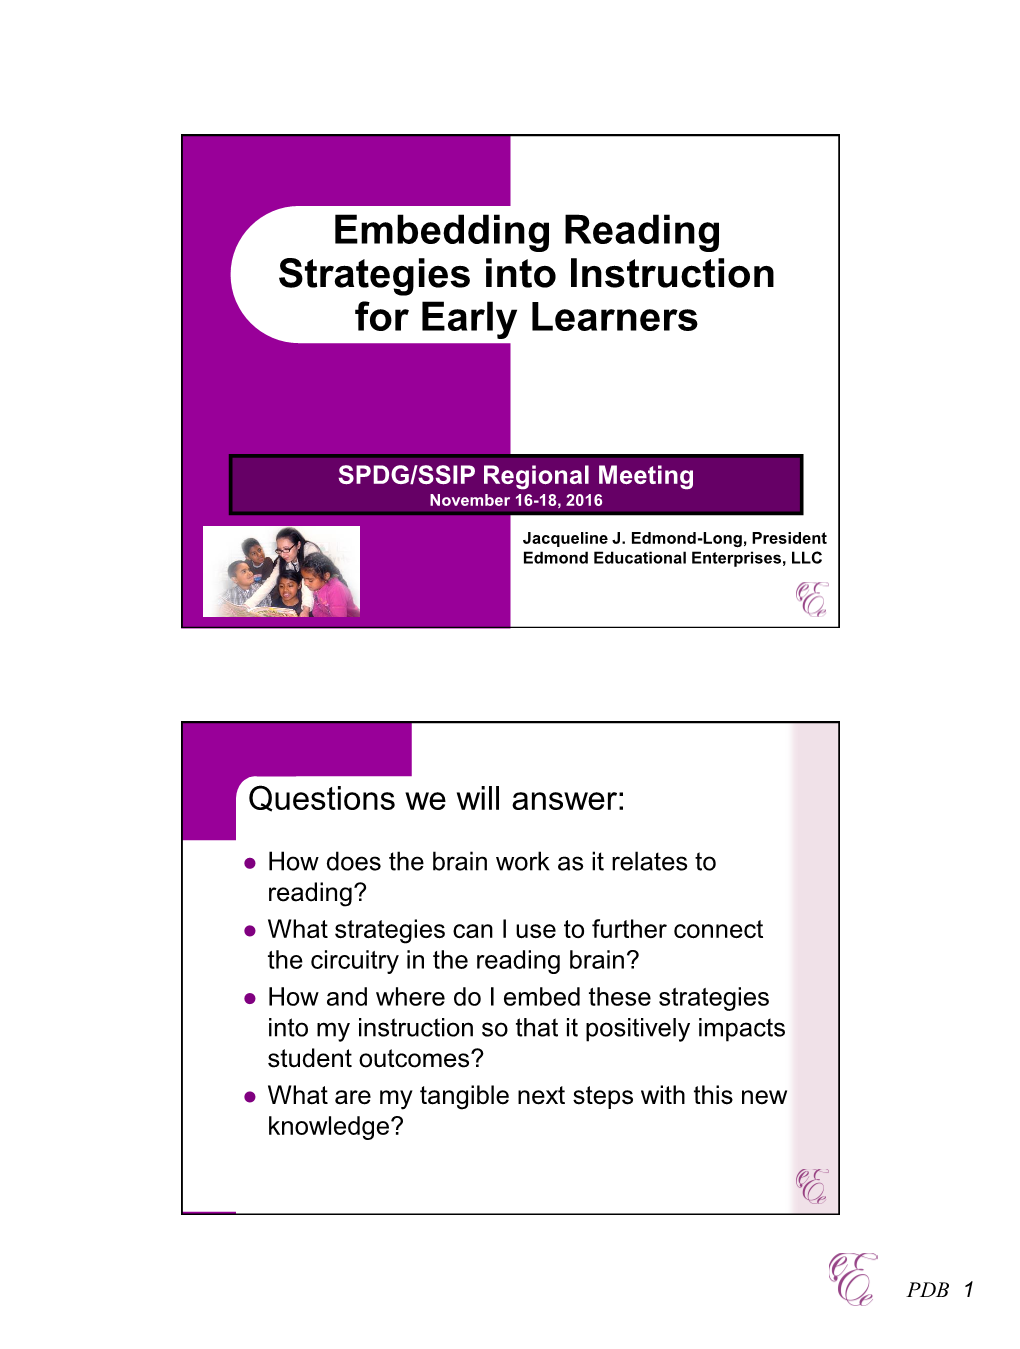 Embedding Reading Strategies Into Instruction for Early Learners